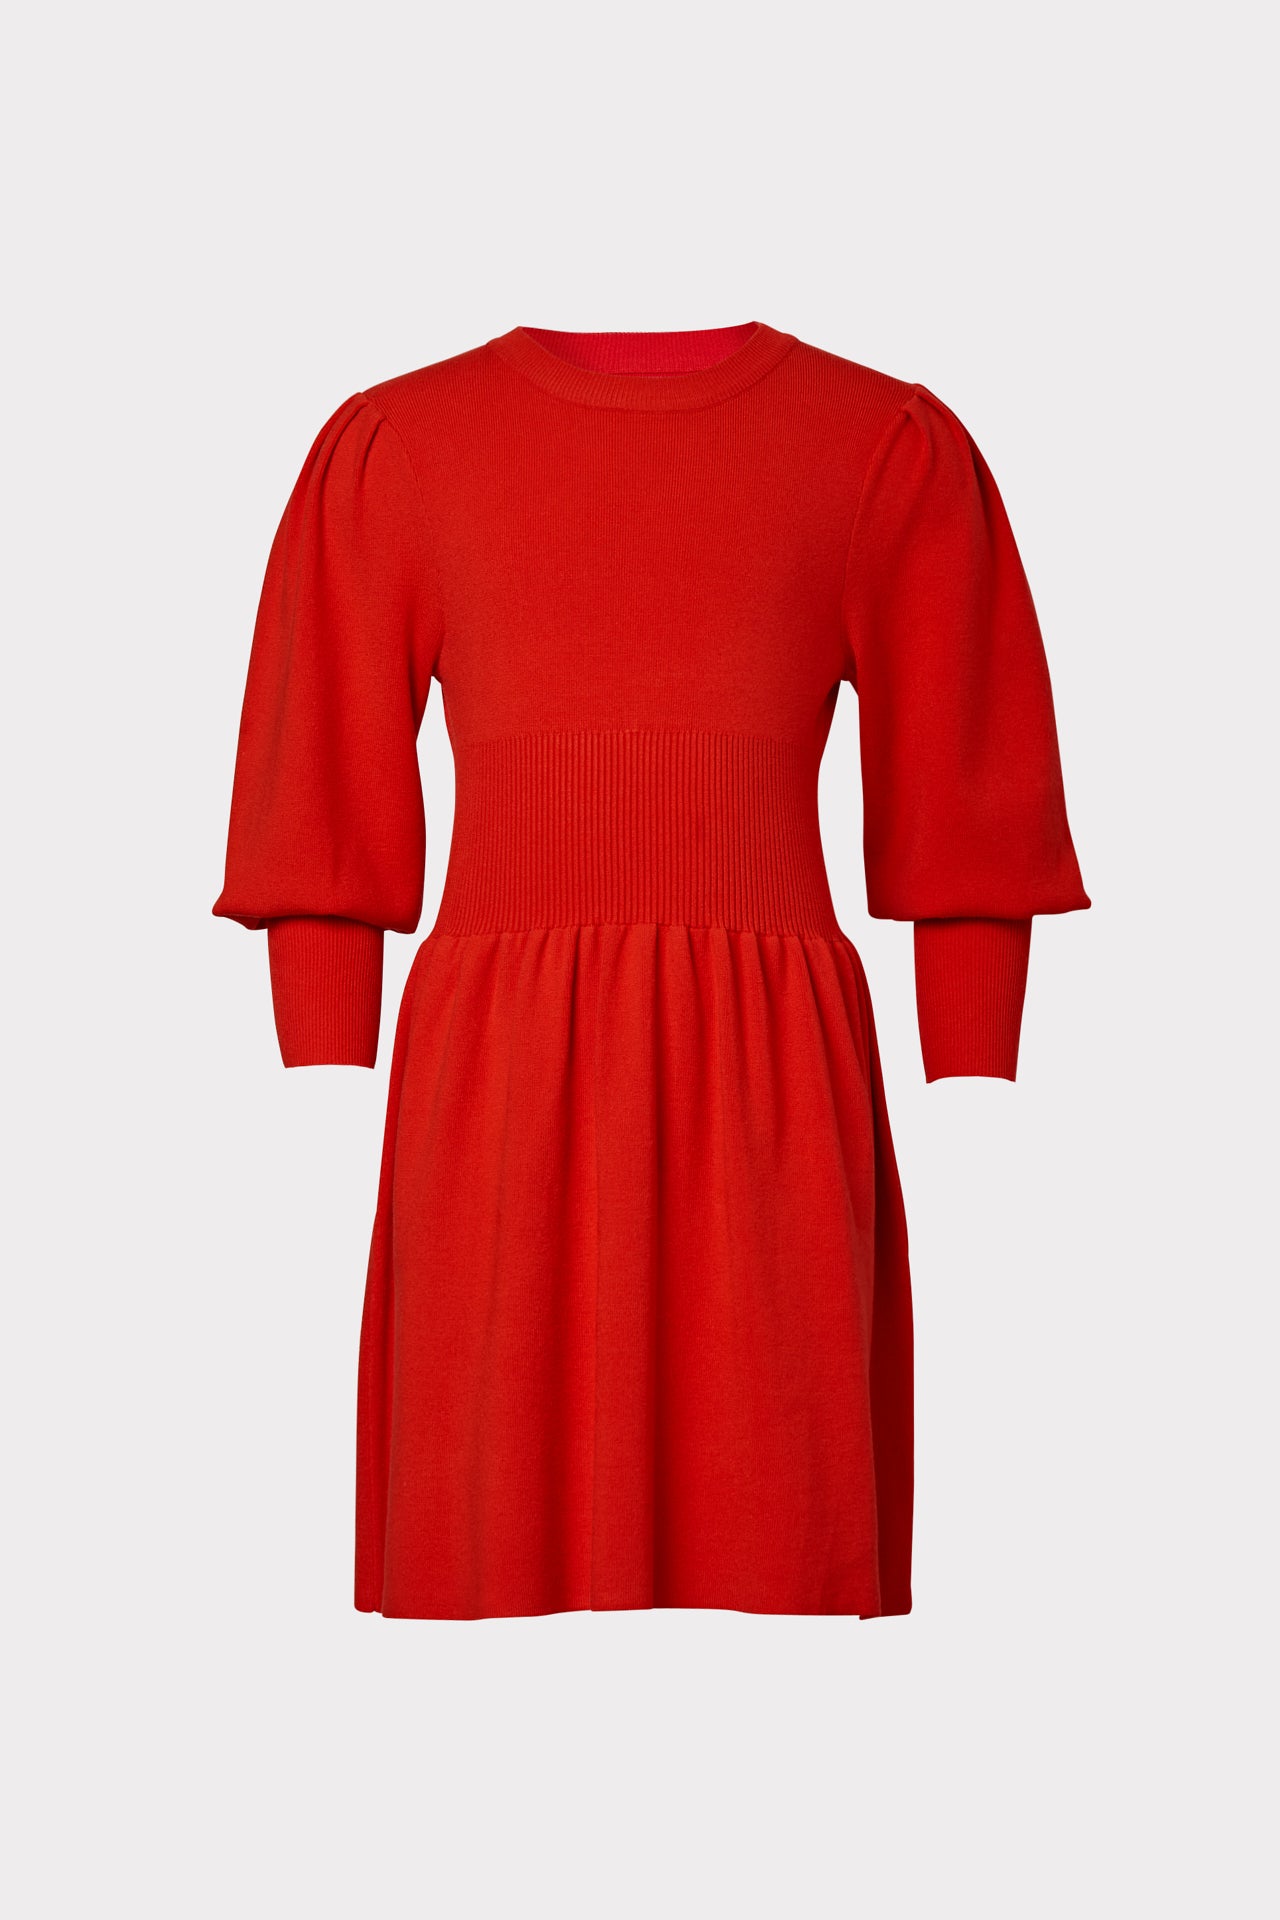 Milly Minis Poof Sleeve Fit & Flare Dress